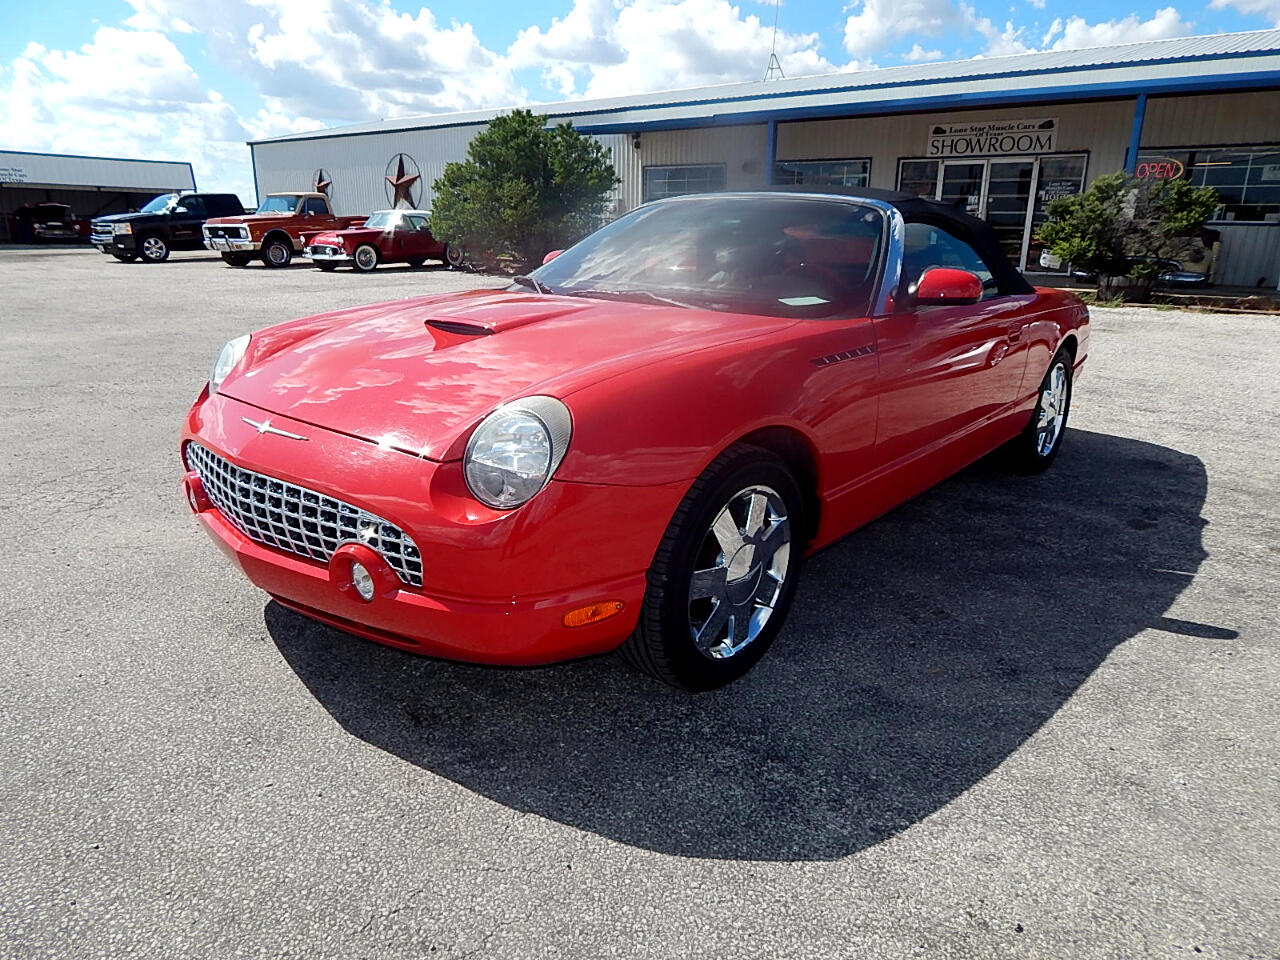 Ford Thunderbird 2dr Convertible Deluxe 2002